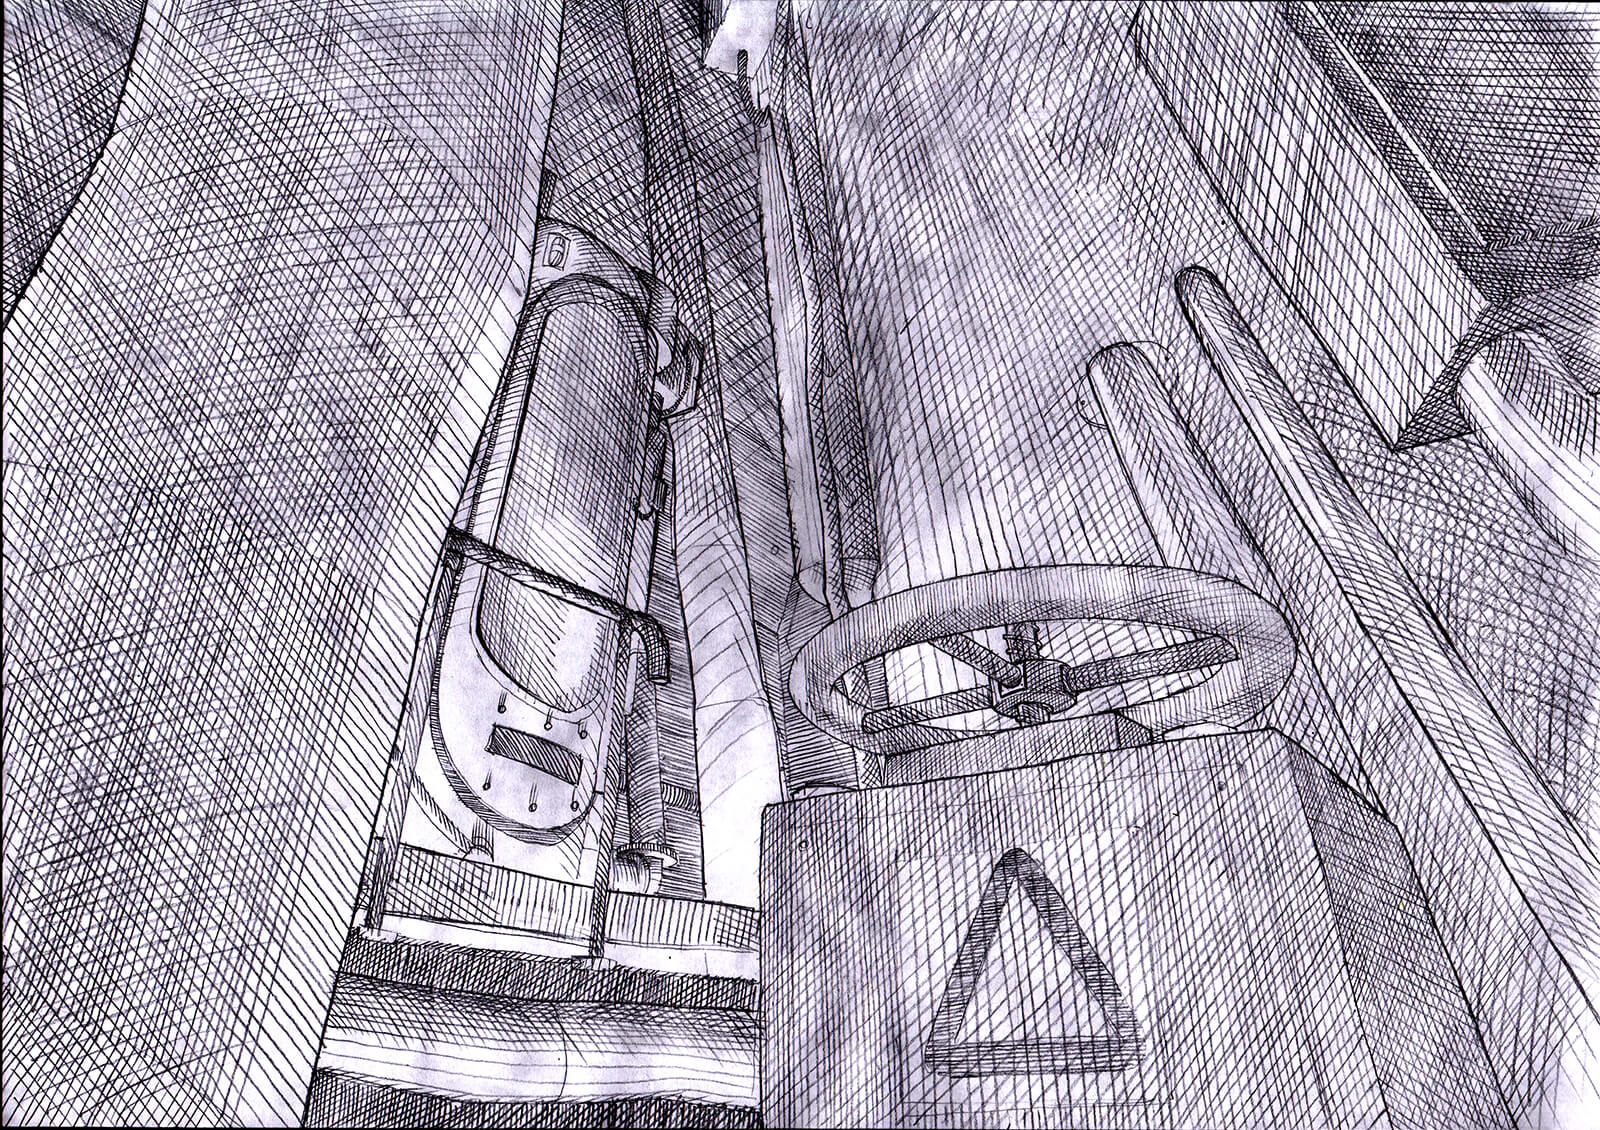 Black-and-white concept sketch for the film Core, depicting a safety valve and door in an industrial space